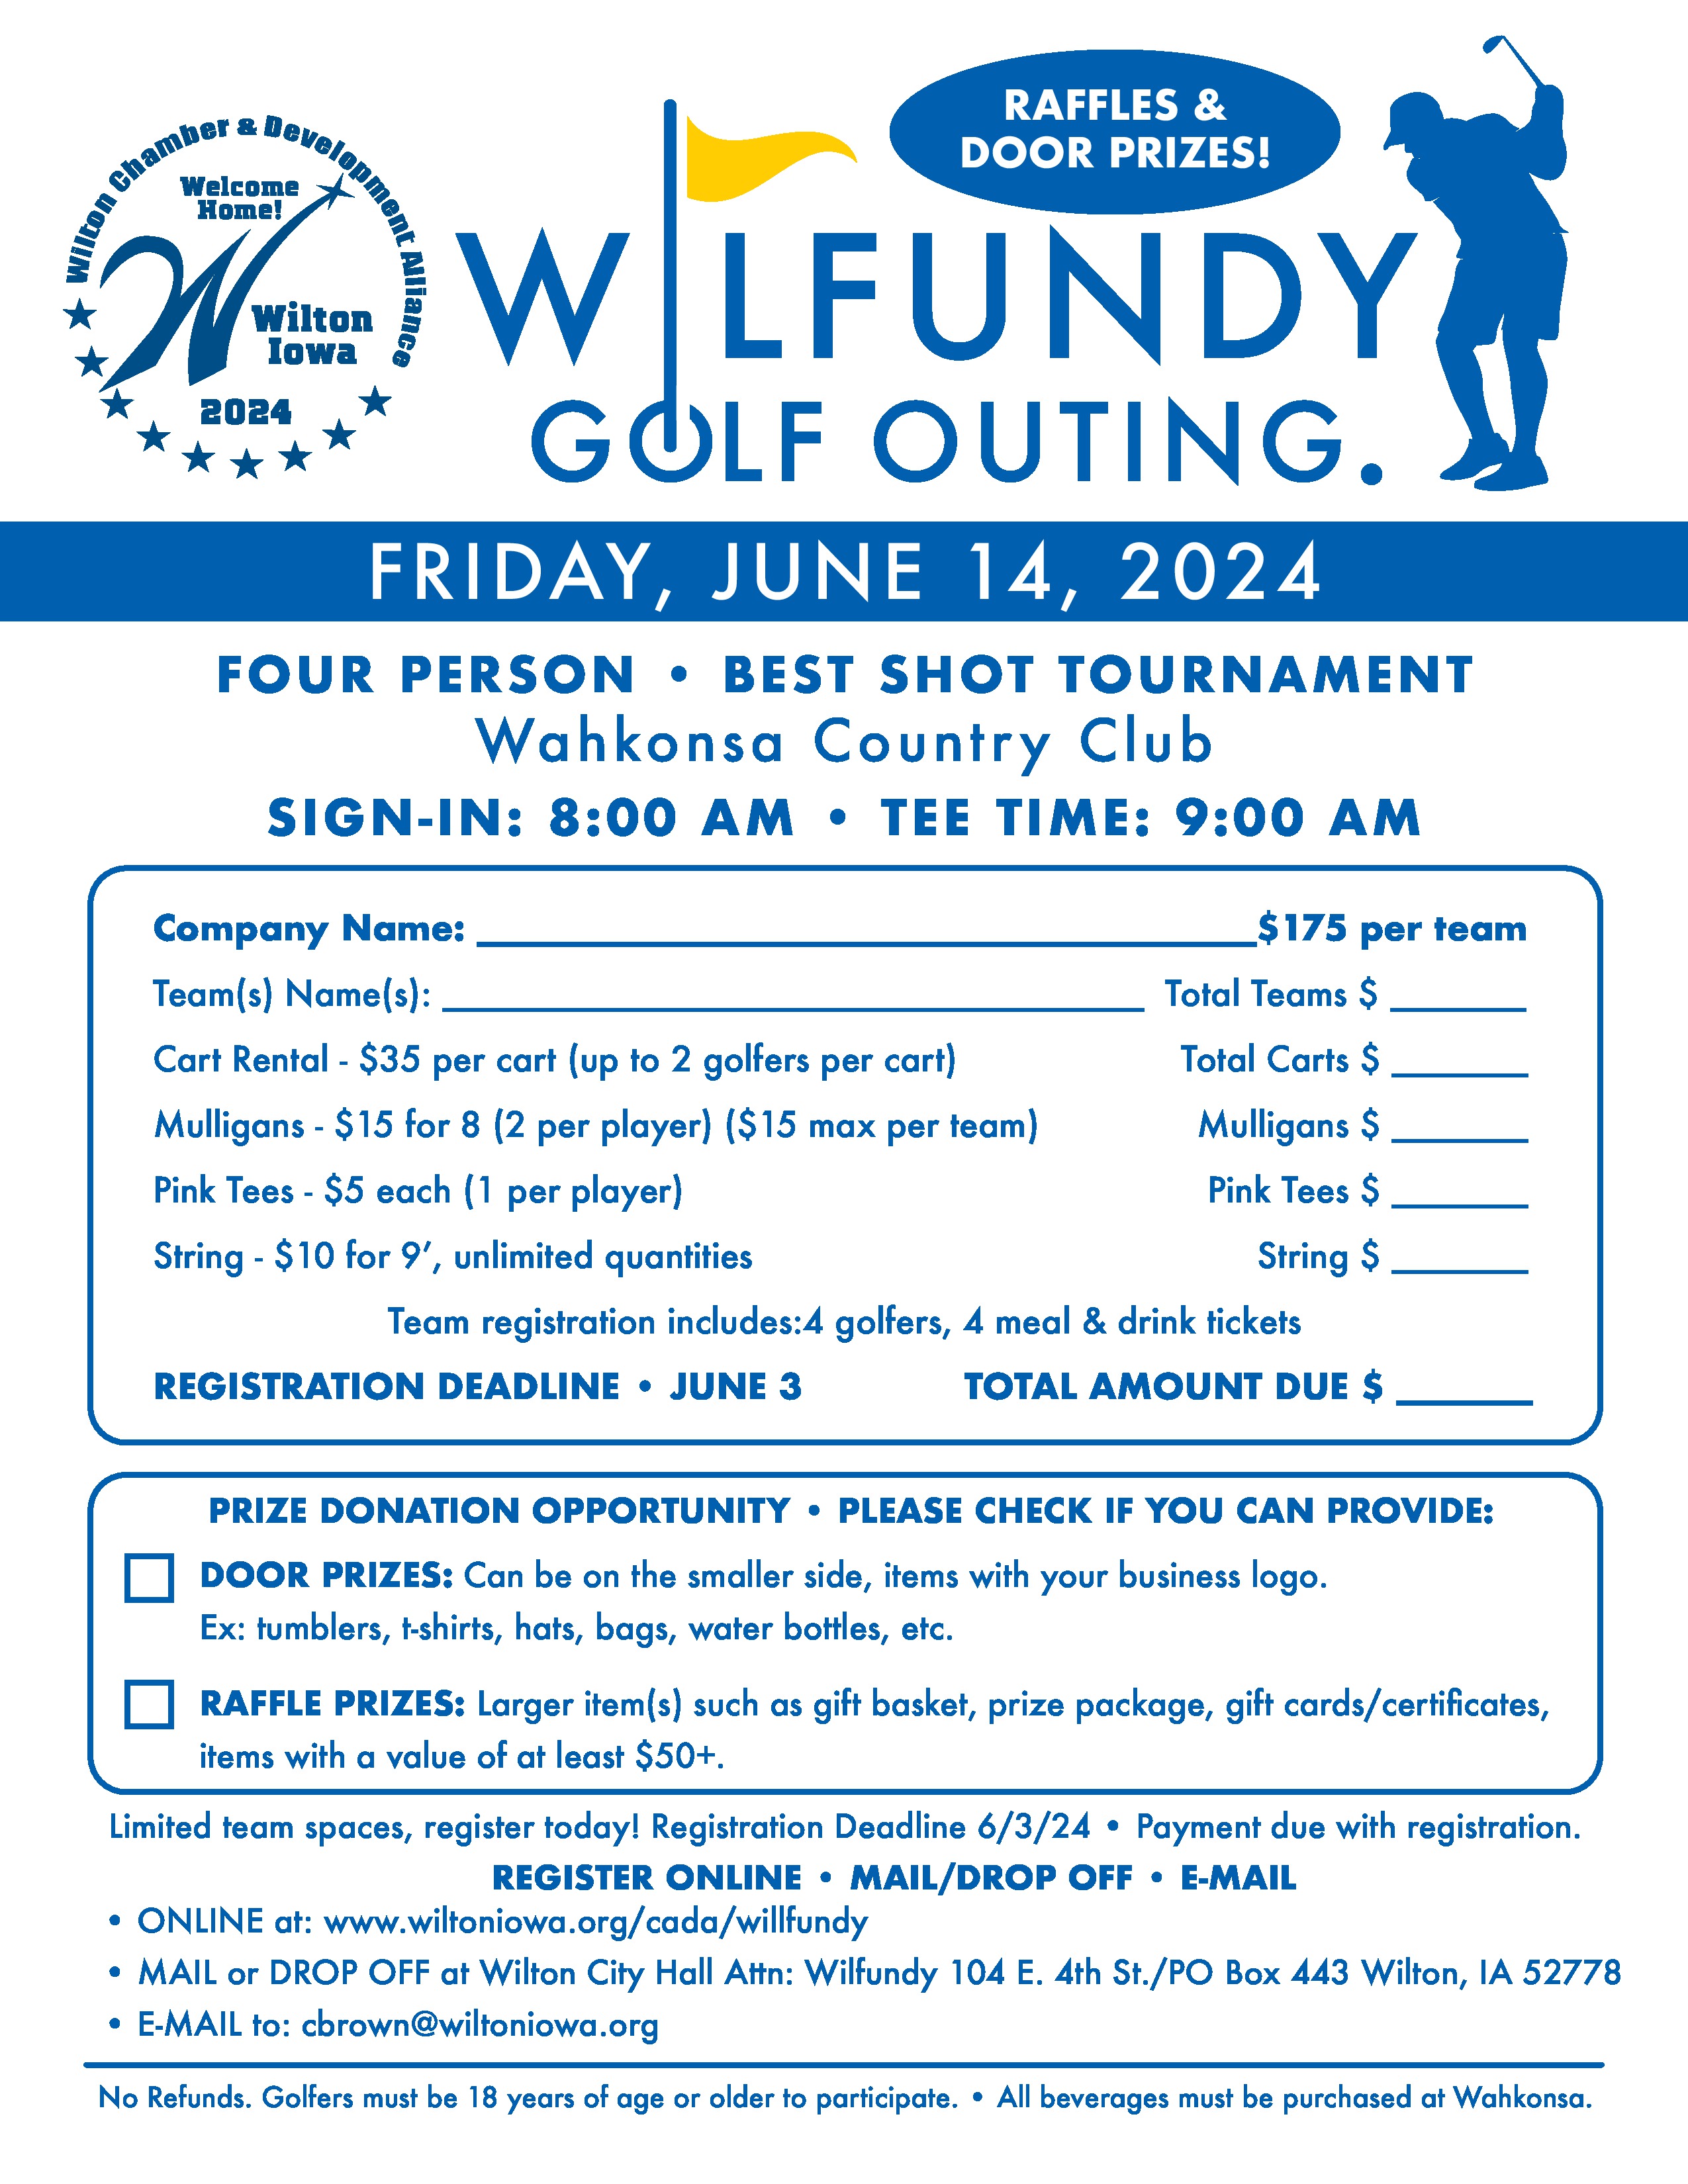 CLICK TO PRINT - Wilfundy Registration Form